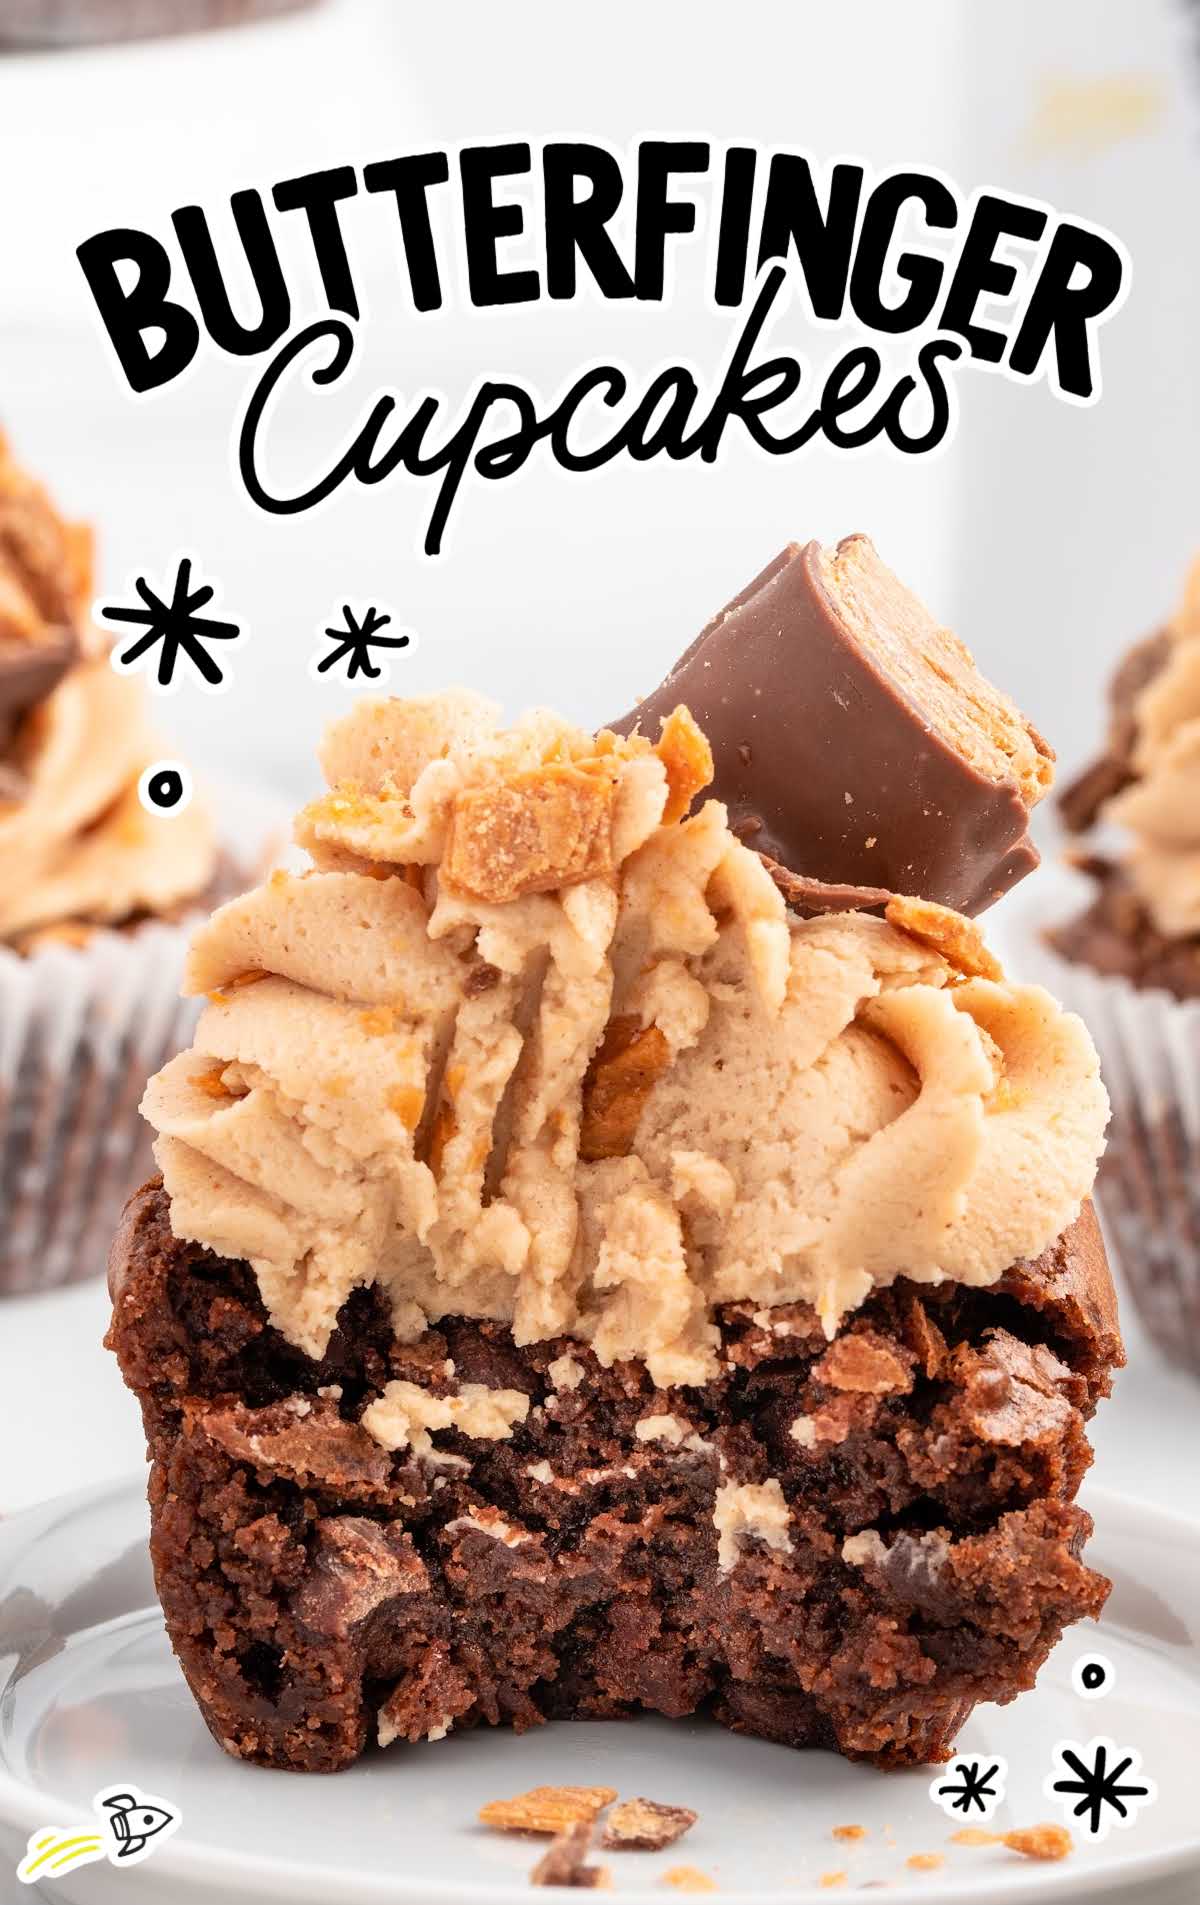 a close up shot of a Butterfinger Cupcake with a bite taken out of it on a plate